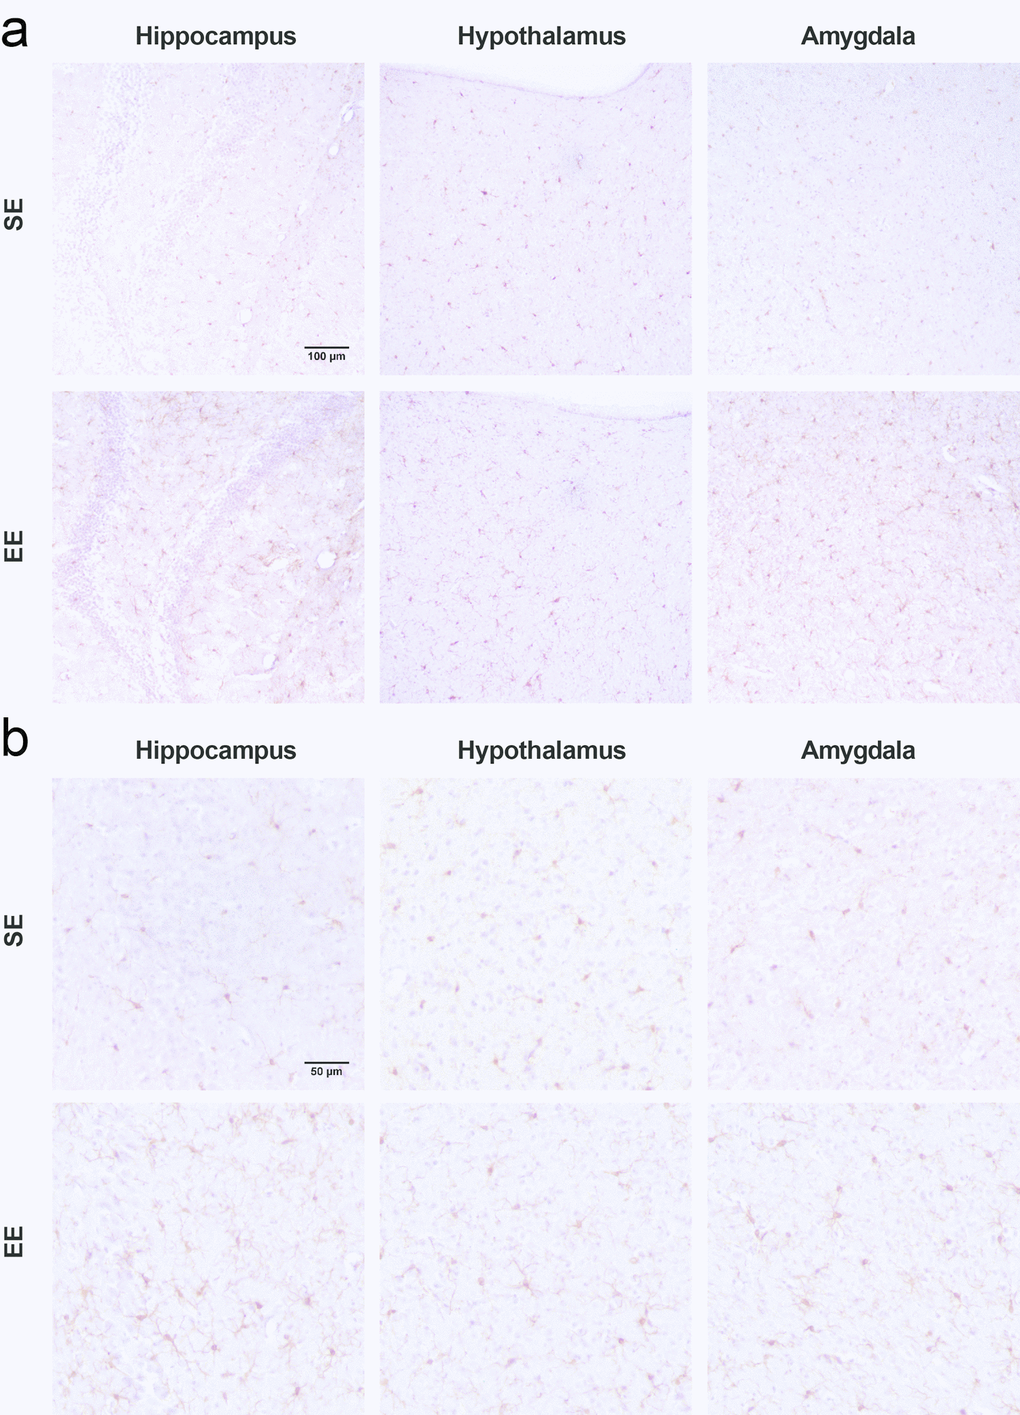 Microglial changes observed after 7.5-month EE. (a) Representative fields of Iba1 stained IHC in the hippocampus (left), hypothalamus (middle), and amygdala (right) at 20x magnification. (b) 40x magnification. Scalebars, (a) 100 µm and (b) 50 µm.